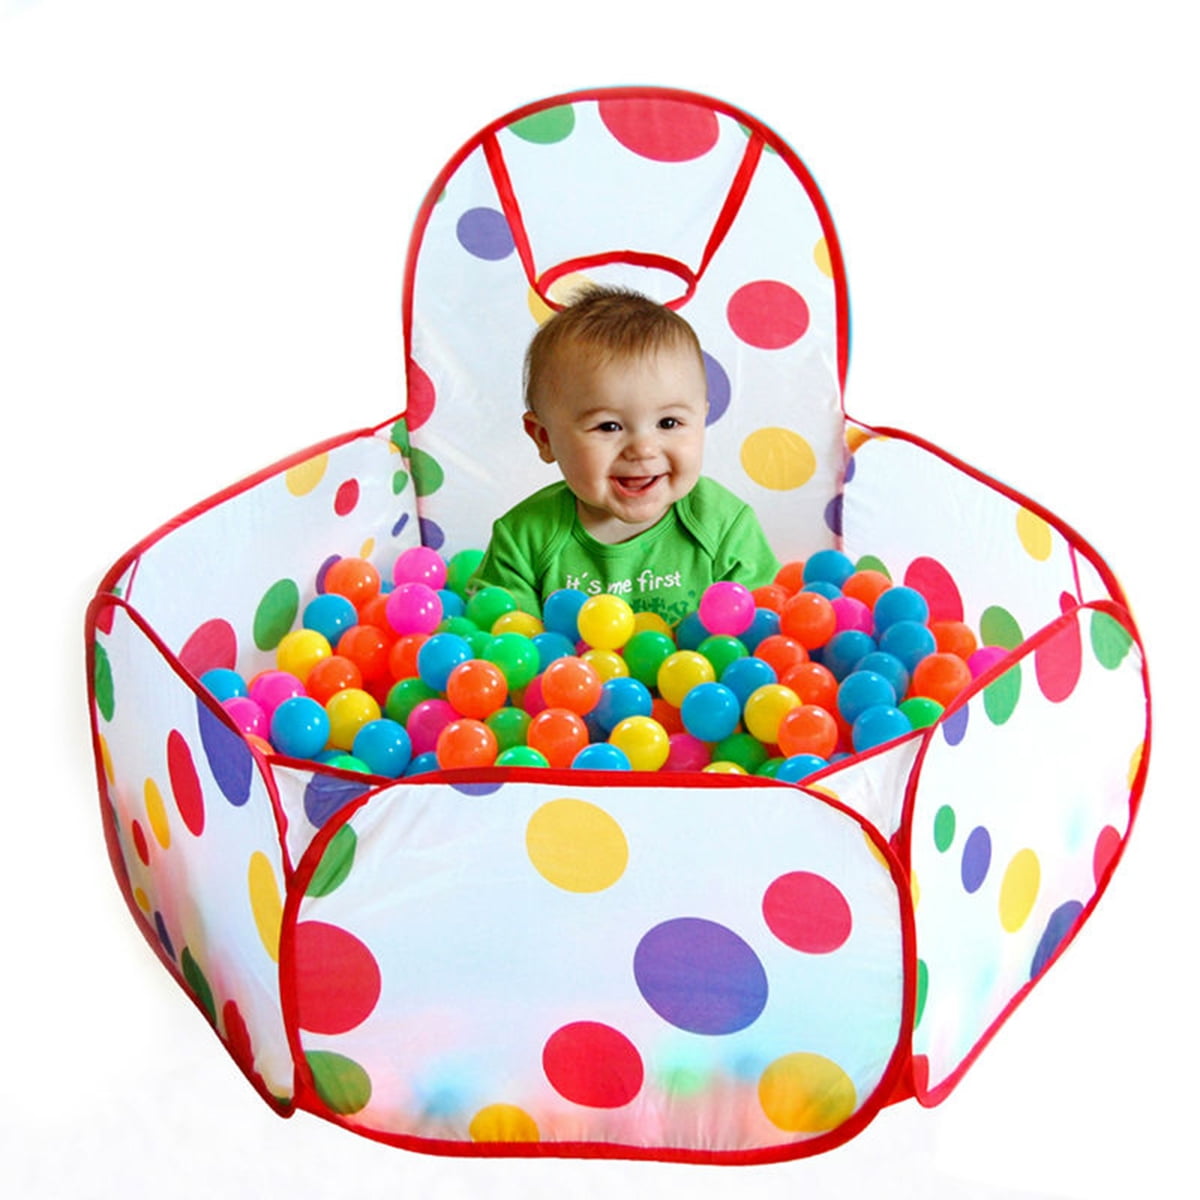 Kids Children Portable Ball Pit Pool Play Tent for Baby Indoor Outdoor Game Toy